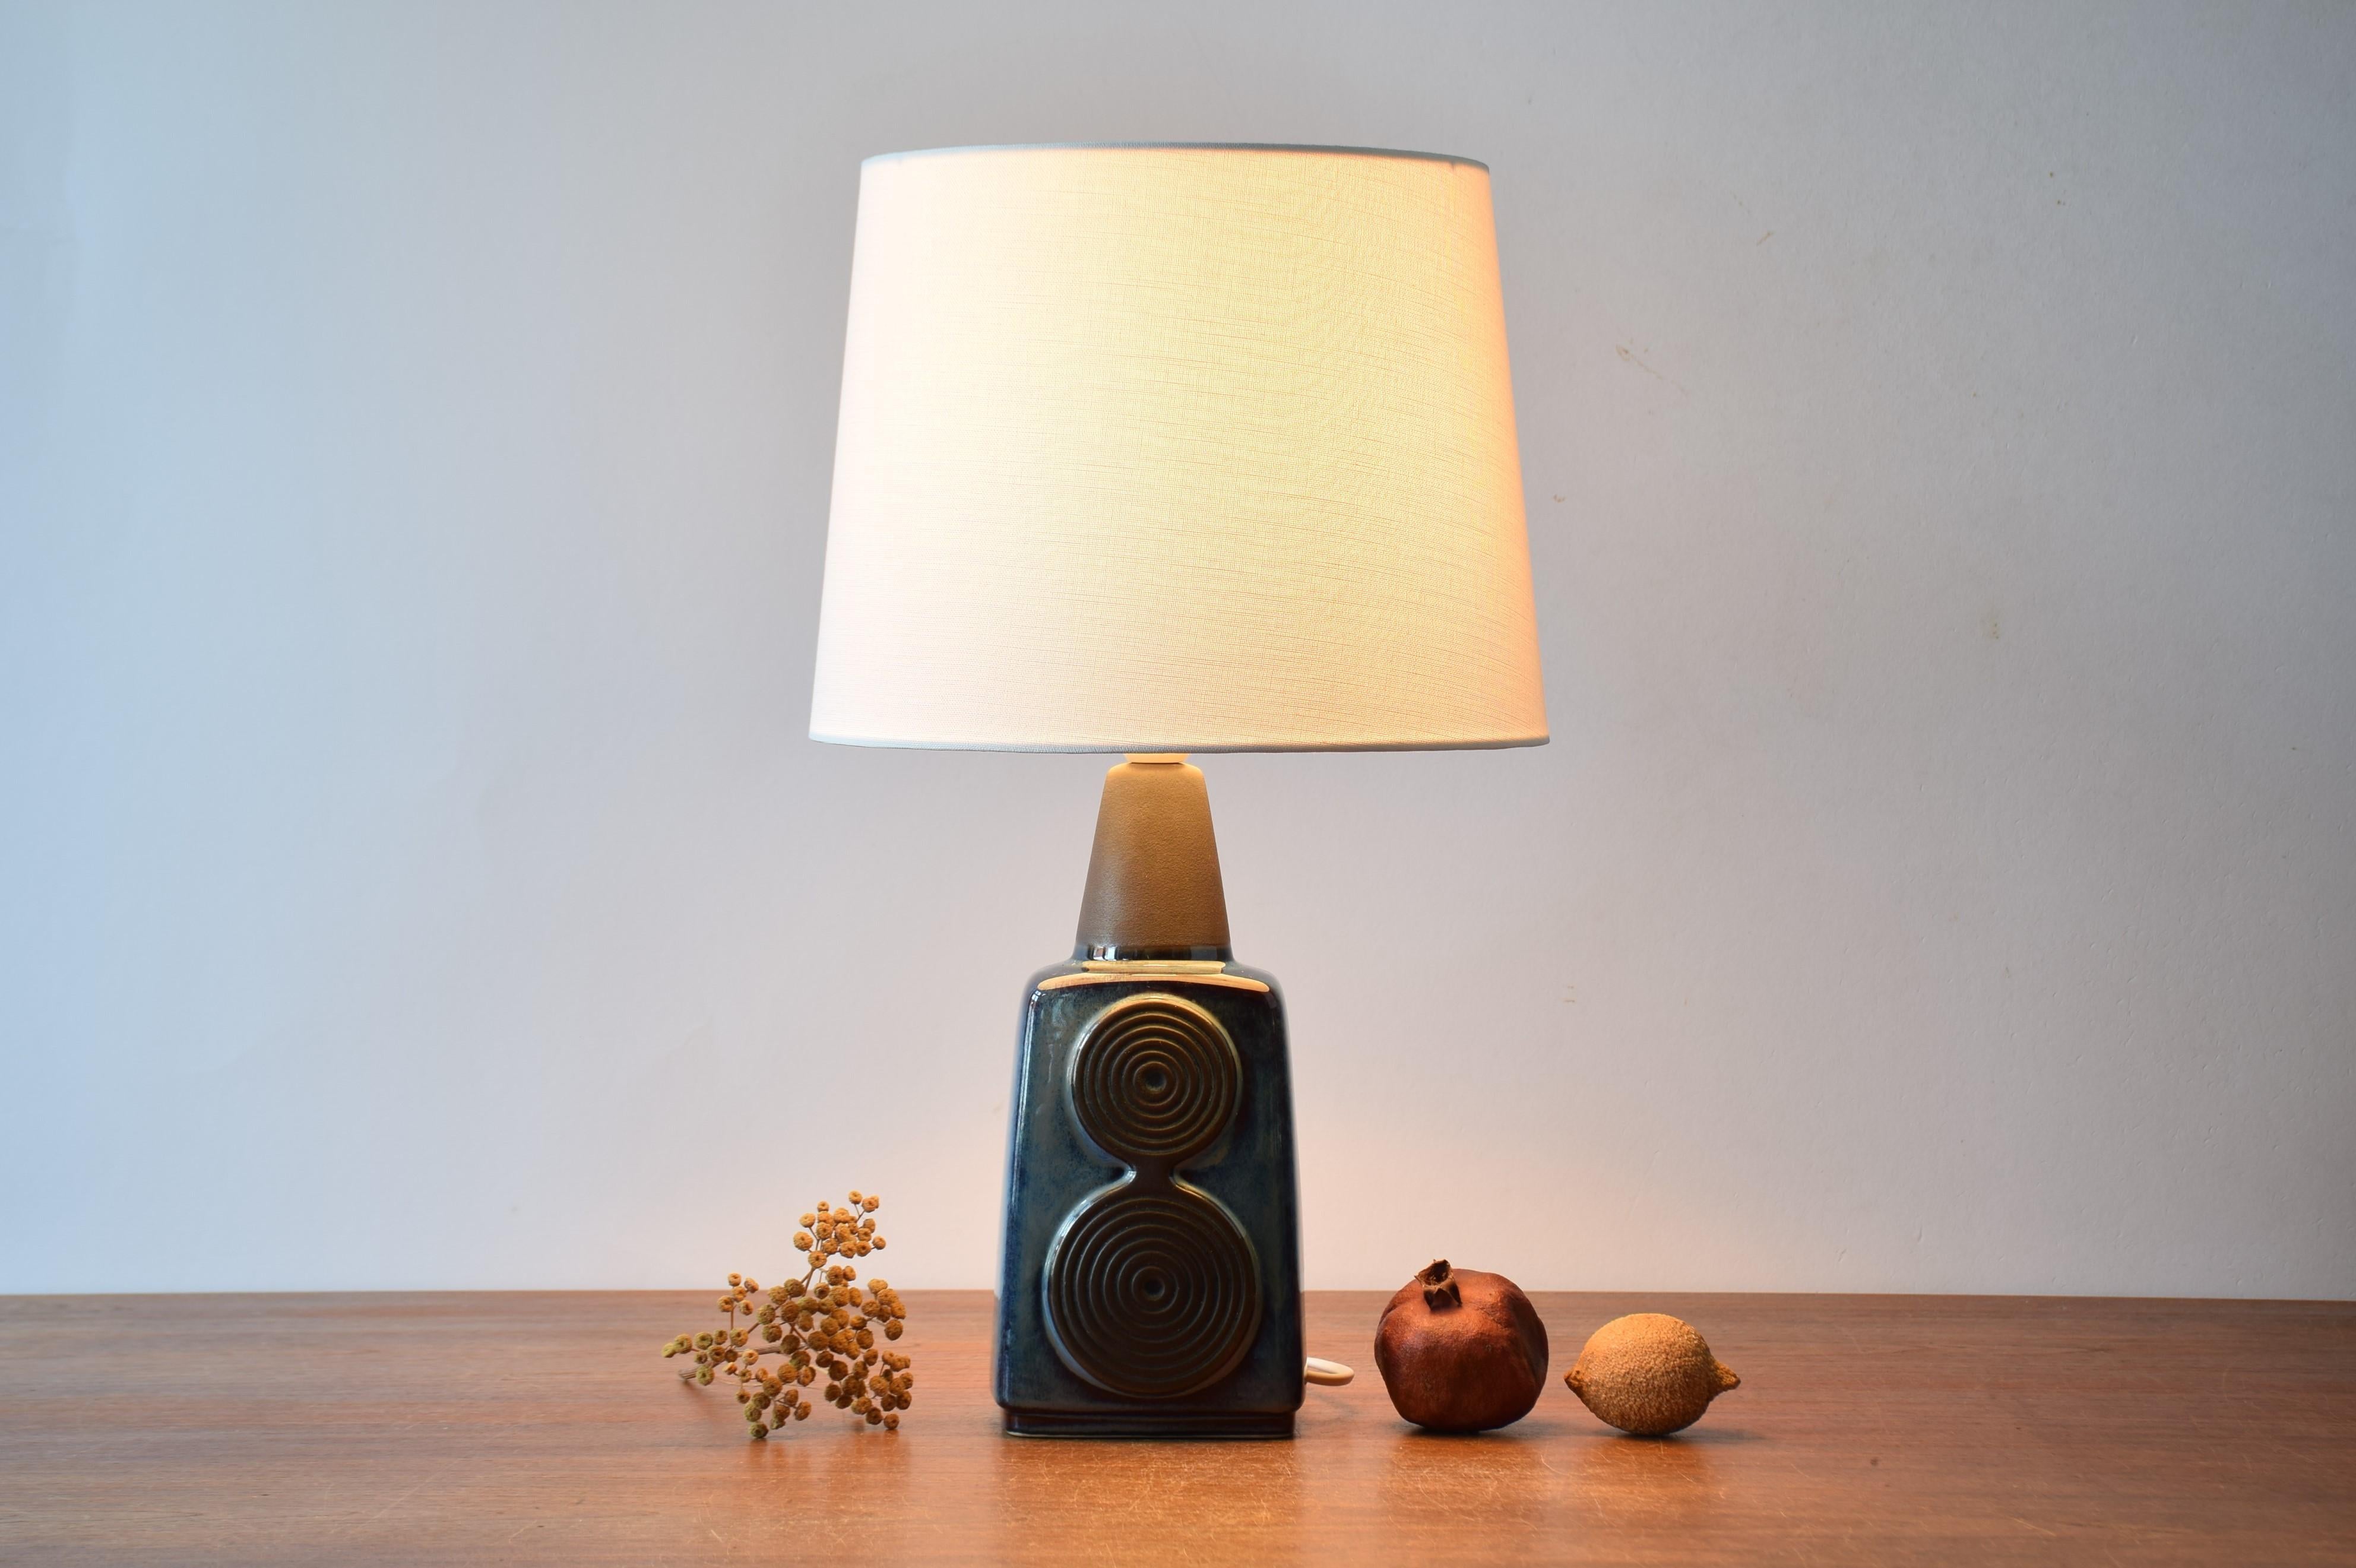 Table lamp by Einar Johansen for Søholm Stentøj, Denmark, circa 1960s.
The lamp has shiny blue glaze with raised circle decors and neck in matte black. 

Included is a new lamp shade designed and made in Denmark. It is made of woven fabric with